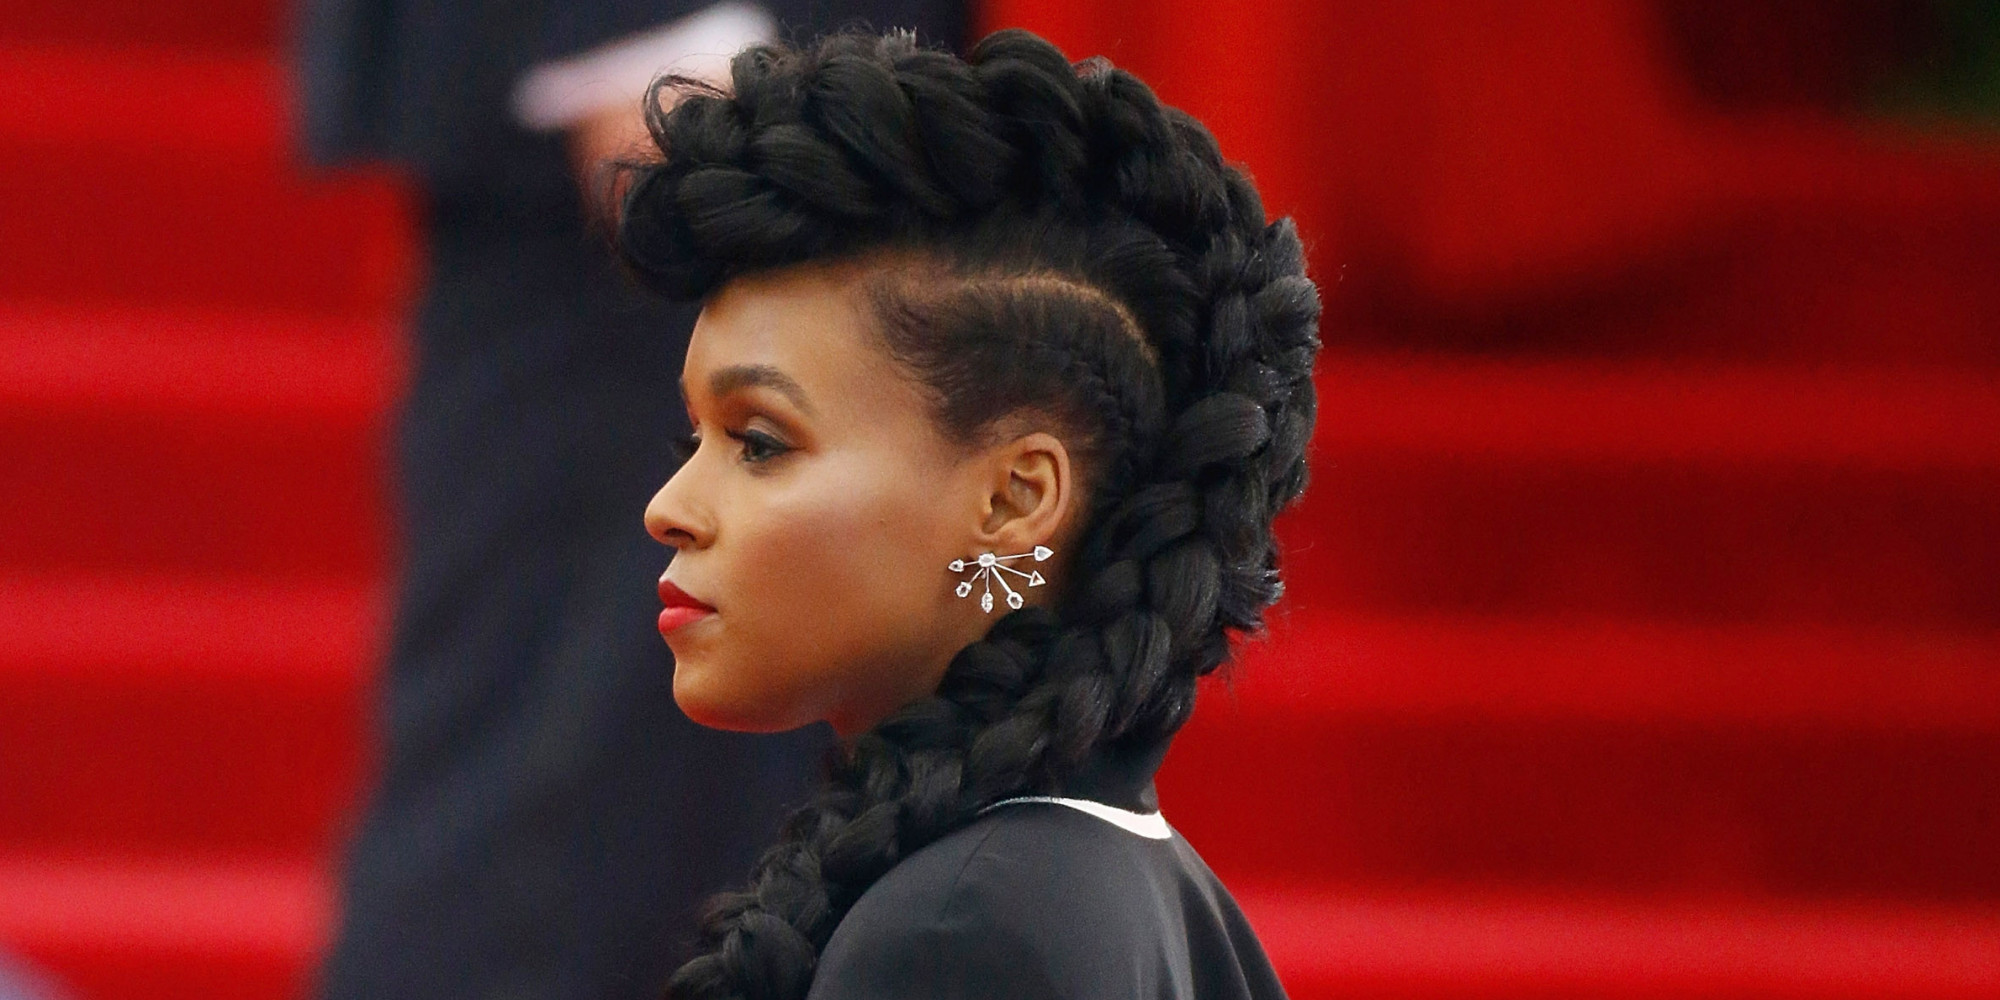 10 mohawk hairstyles for black women you seriously need to try